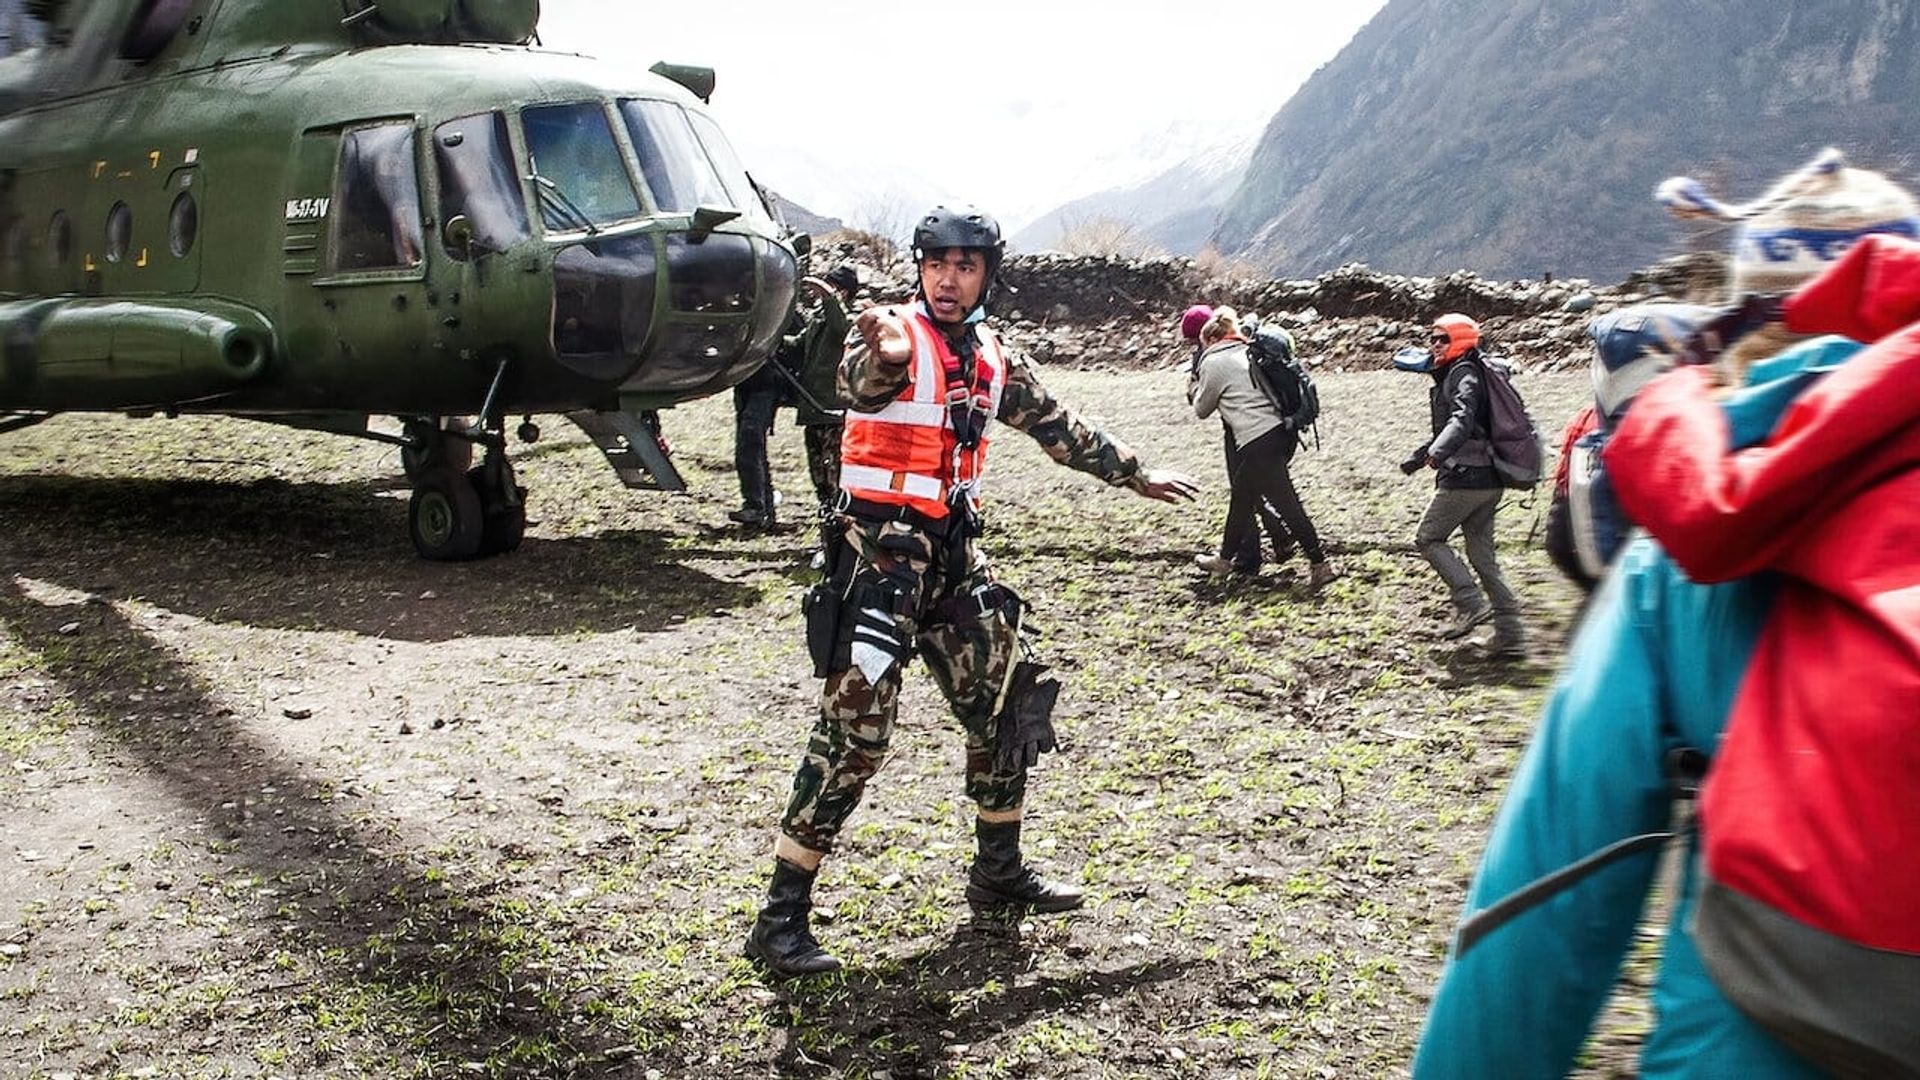 Aftershock: Everest and the Nepal Earthquake Backdrop